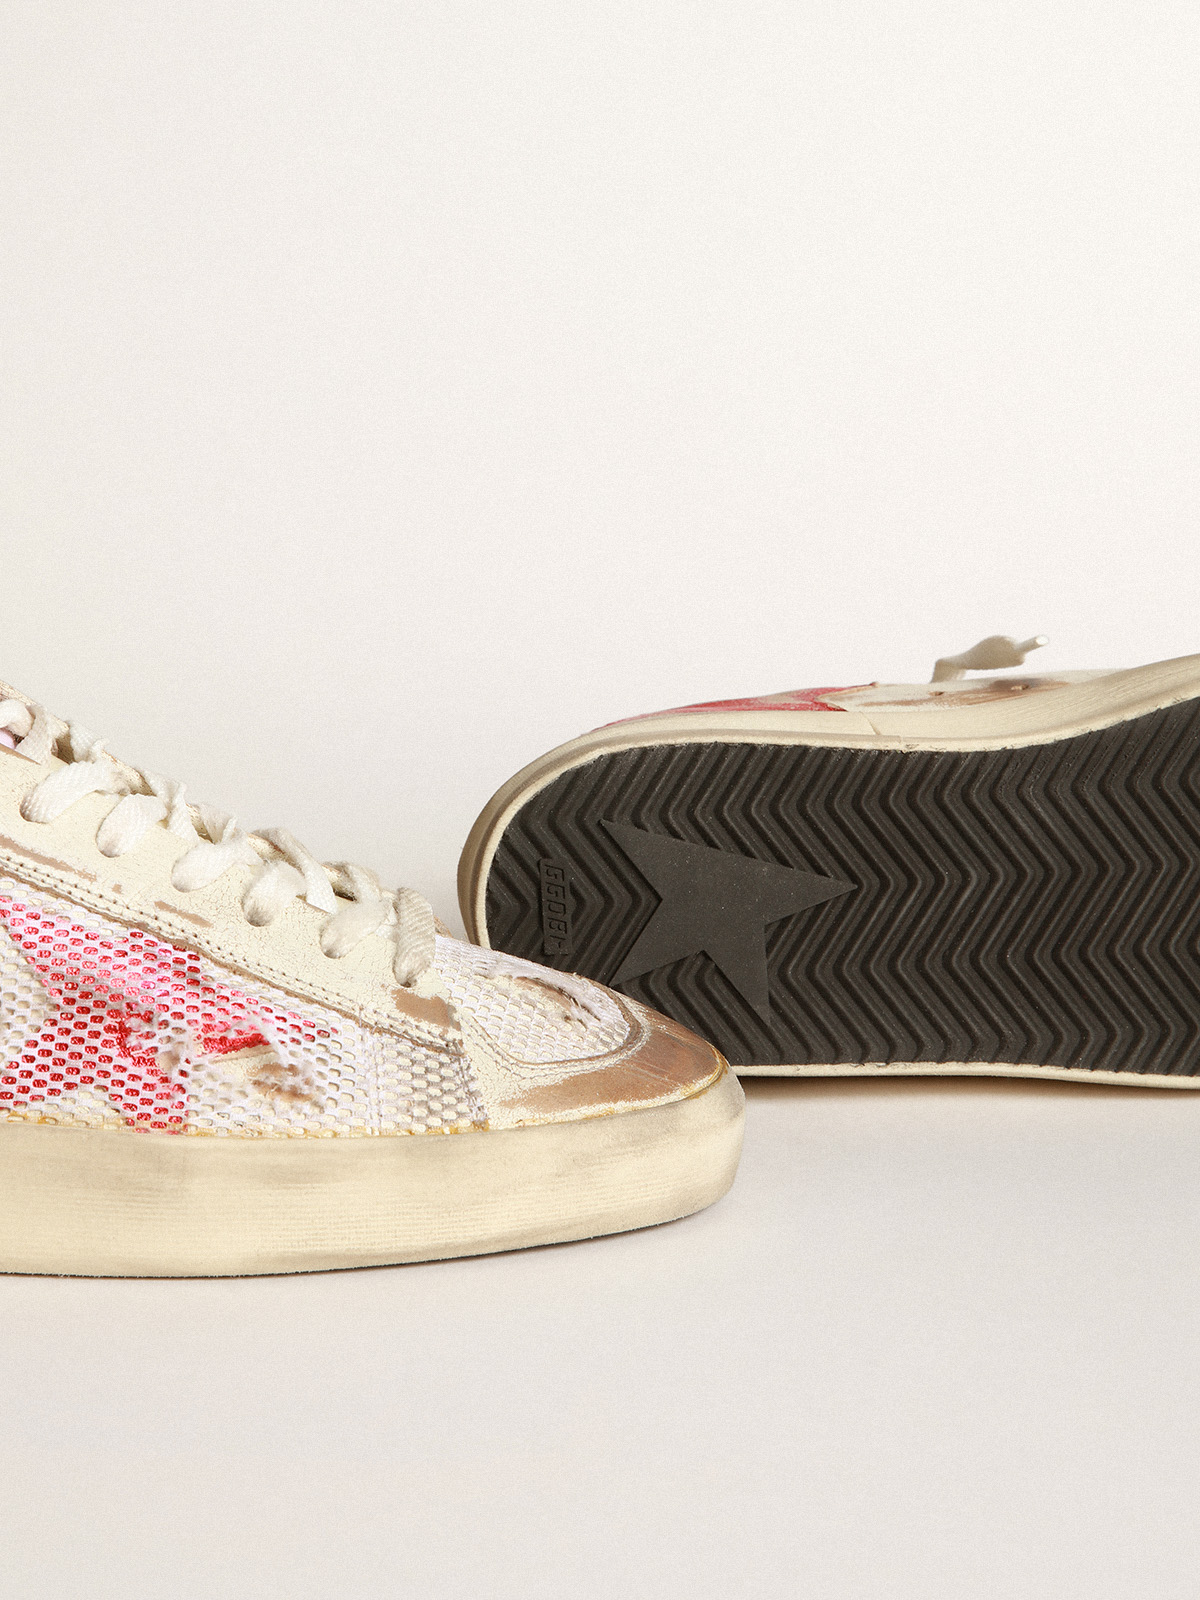 Stardan LAB sneakers in white leather and mesh with red laminated leather  star | Golden Goose